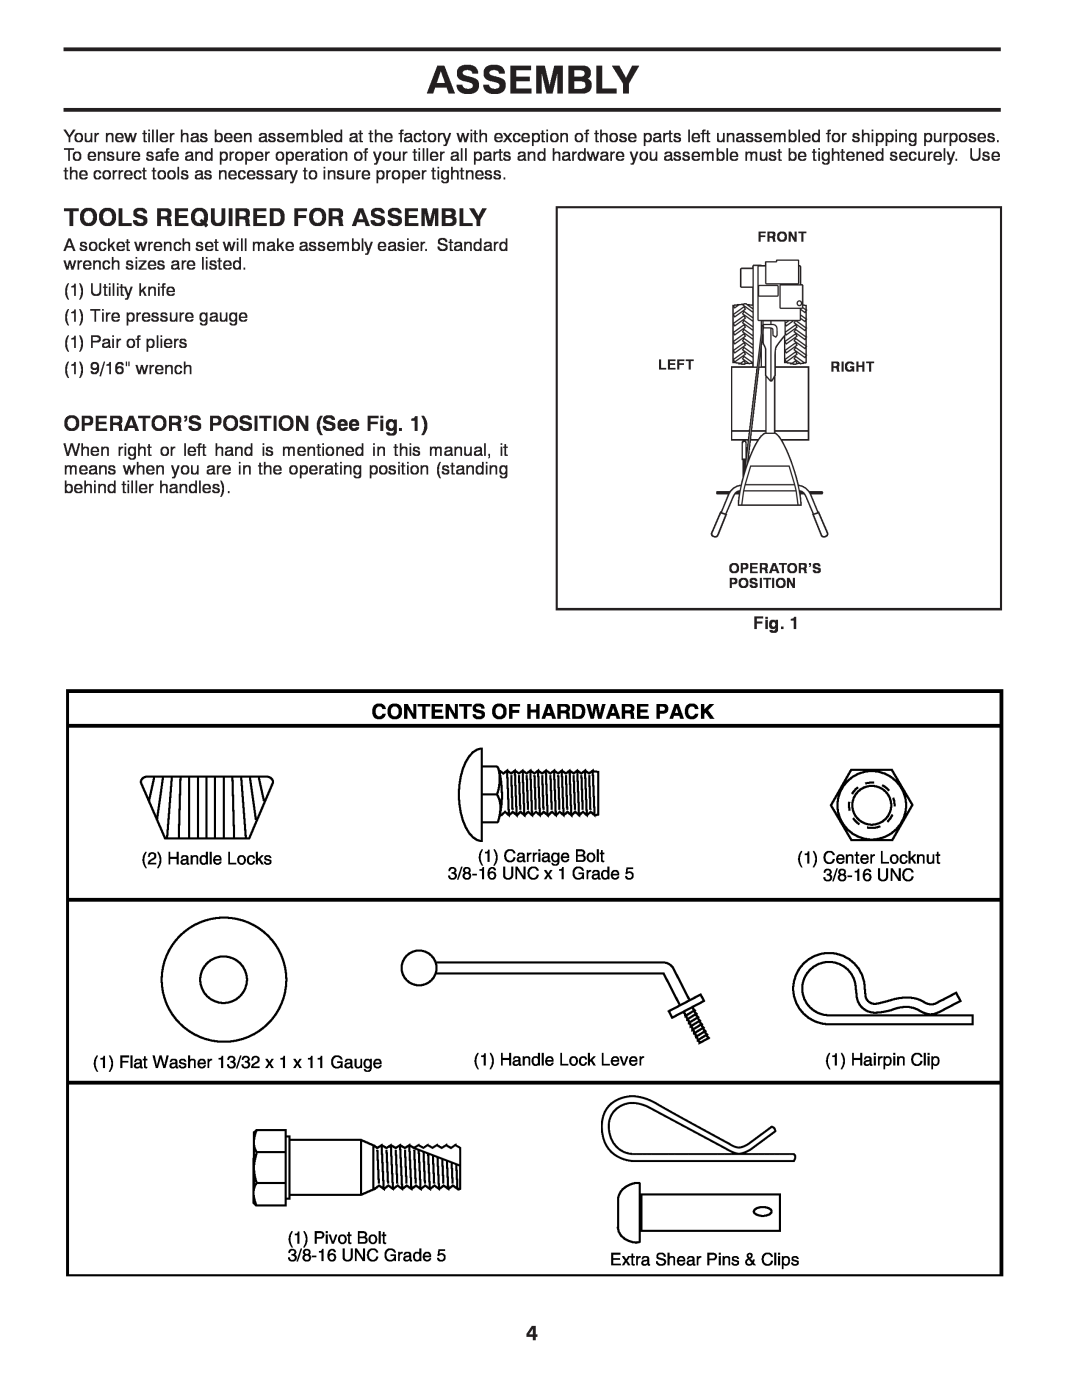 Husqvarna DRT900E owner manual Tools Required For Assembly, OPERATOR’S POSITION See Fig, Contents Of Hardware Pack 